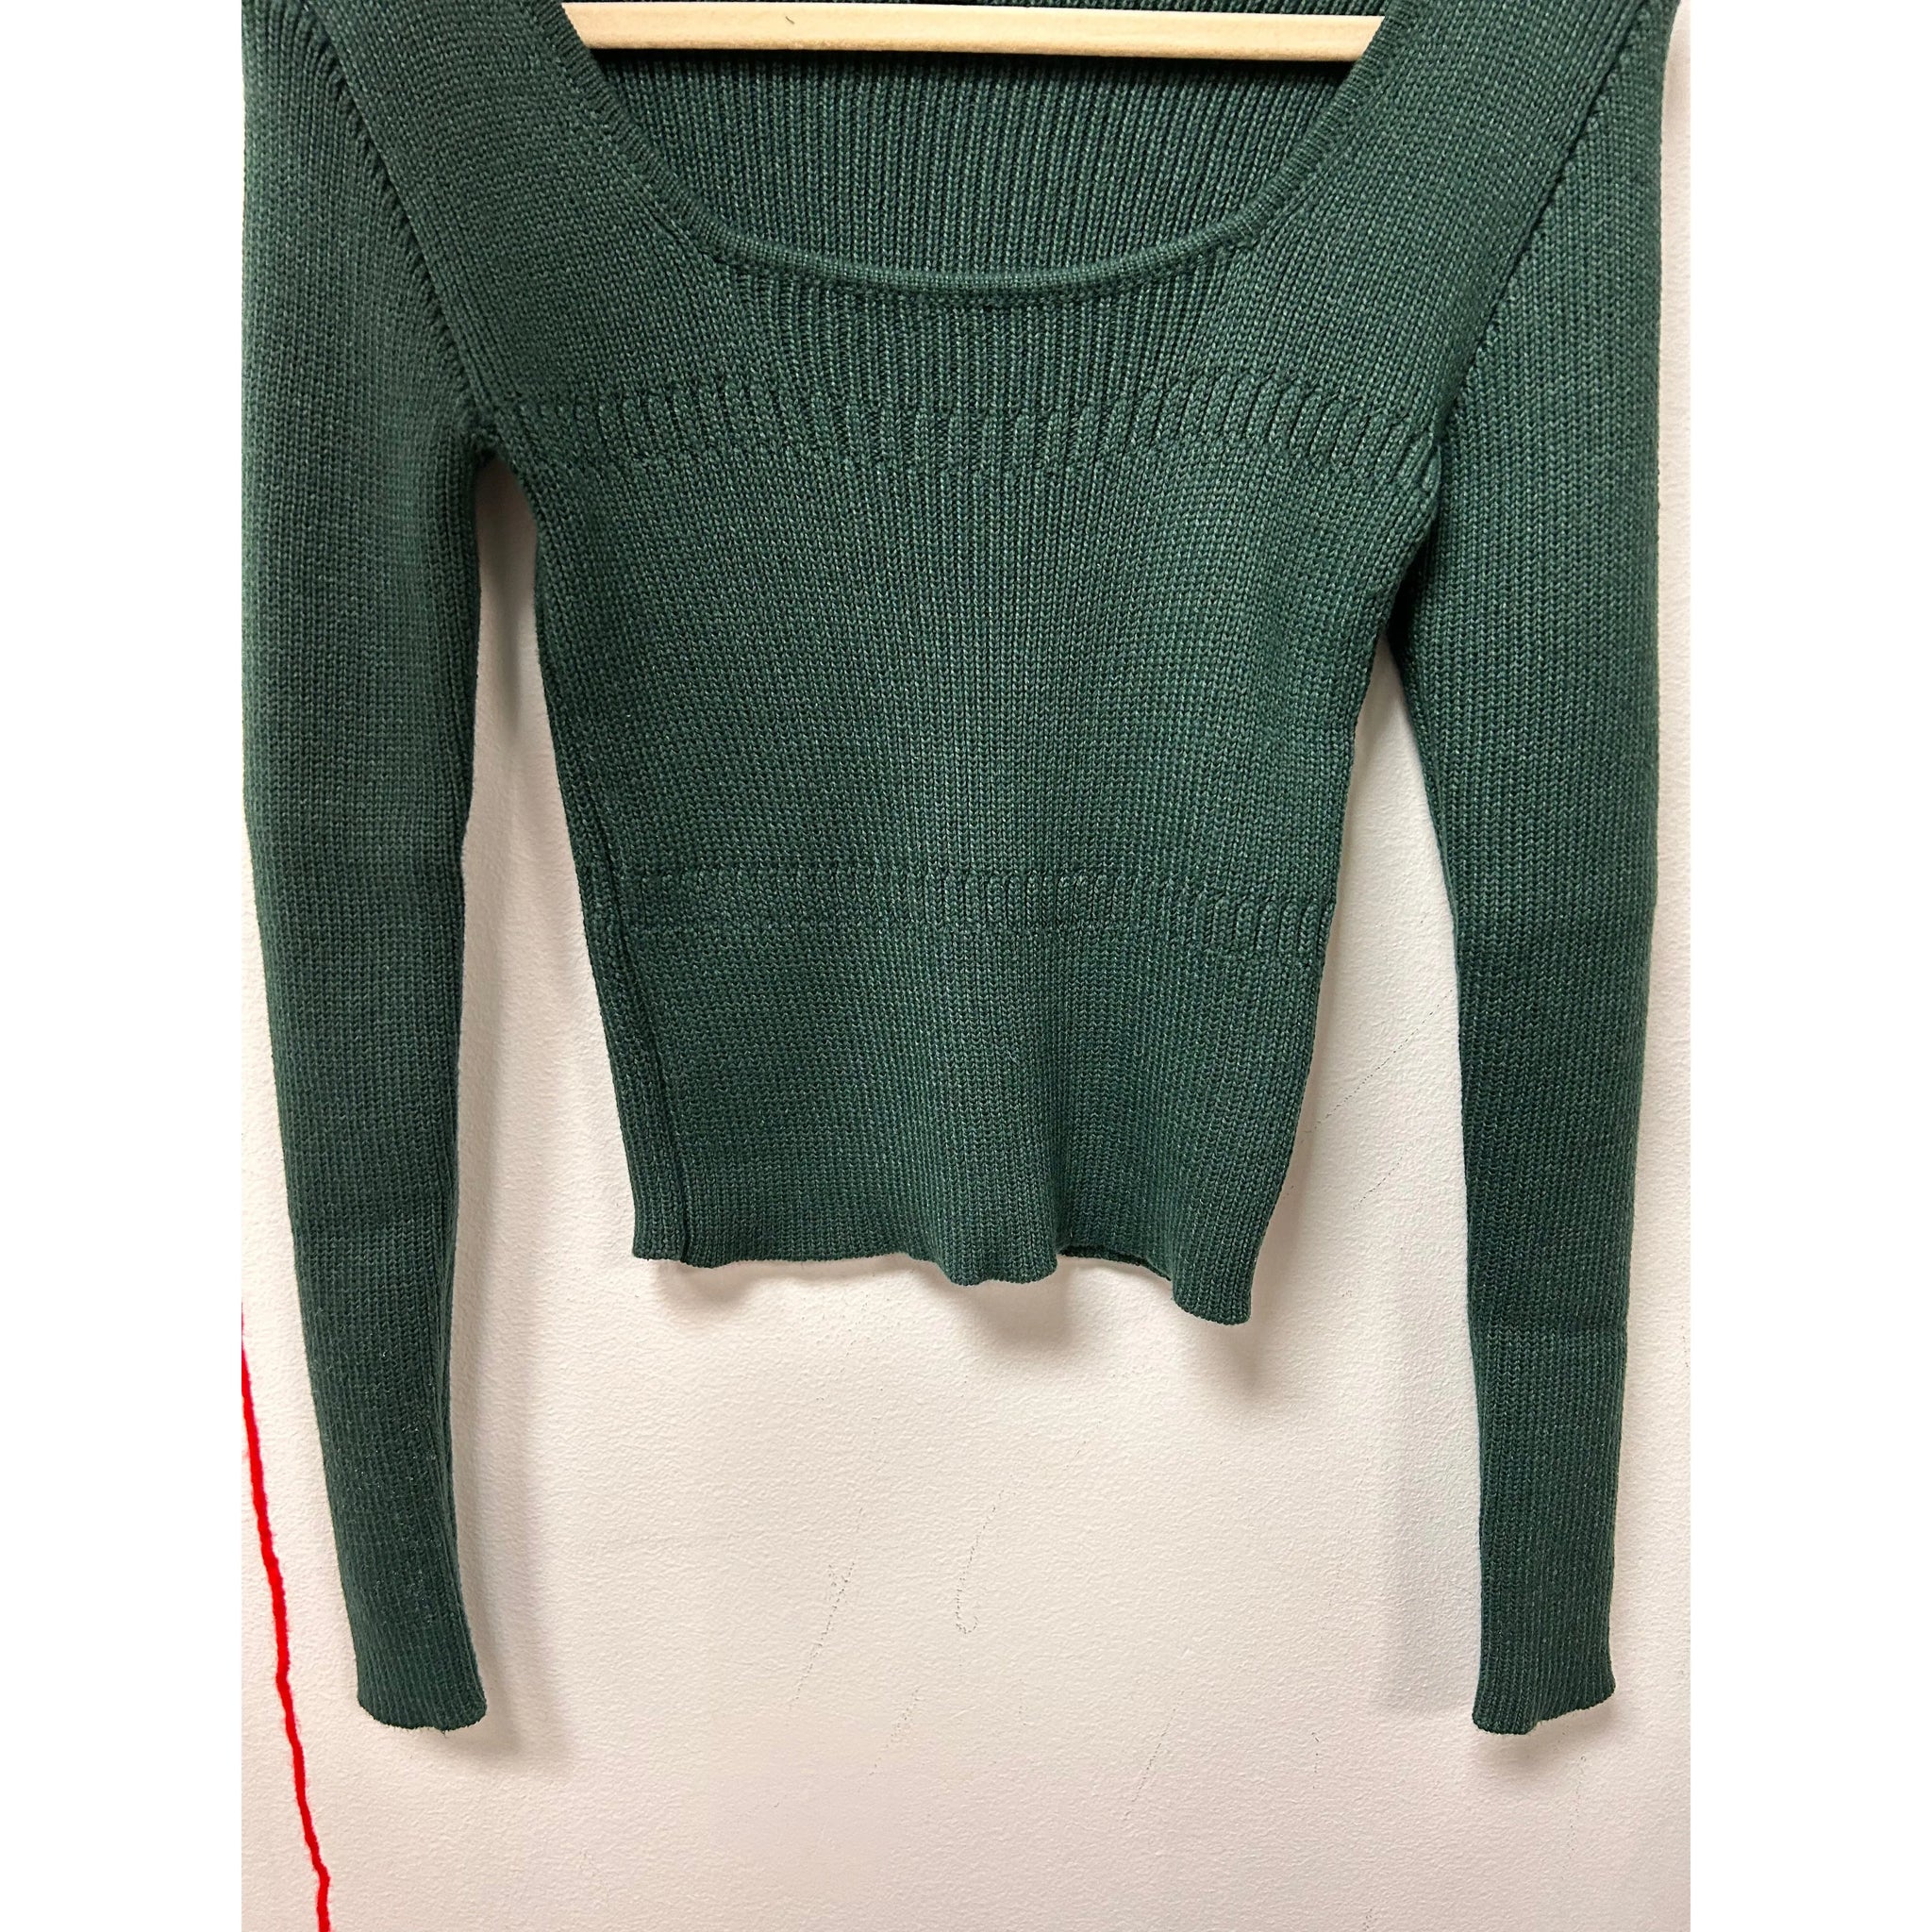 Fitted Square Neck Sweater in Jade Green